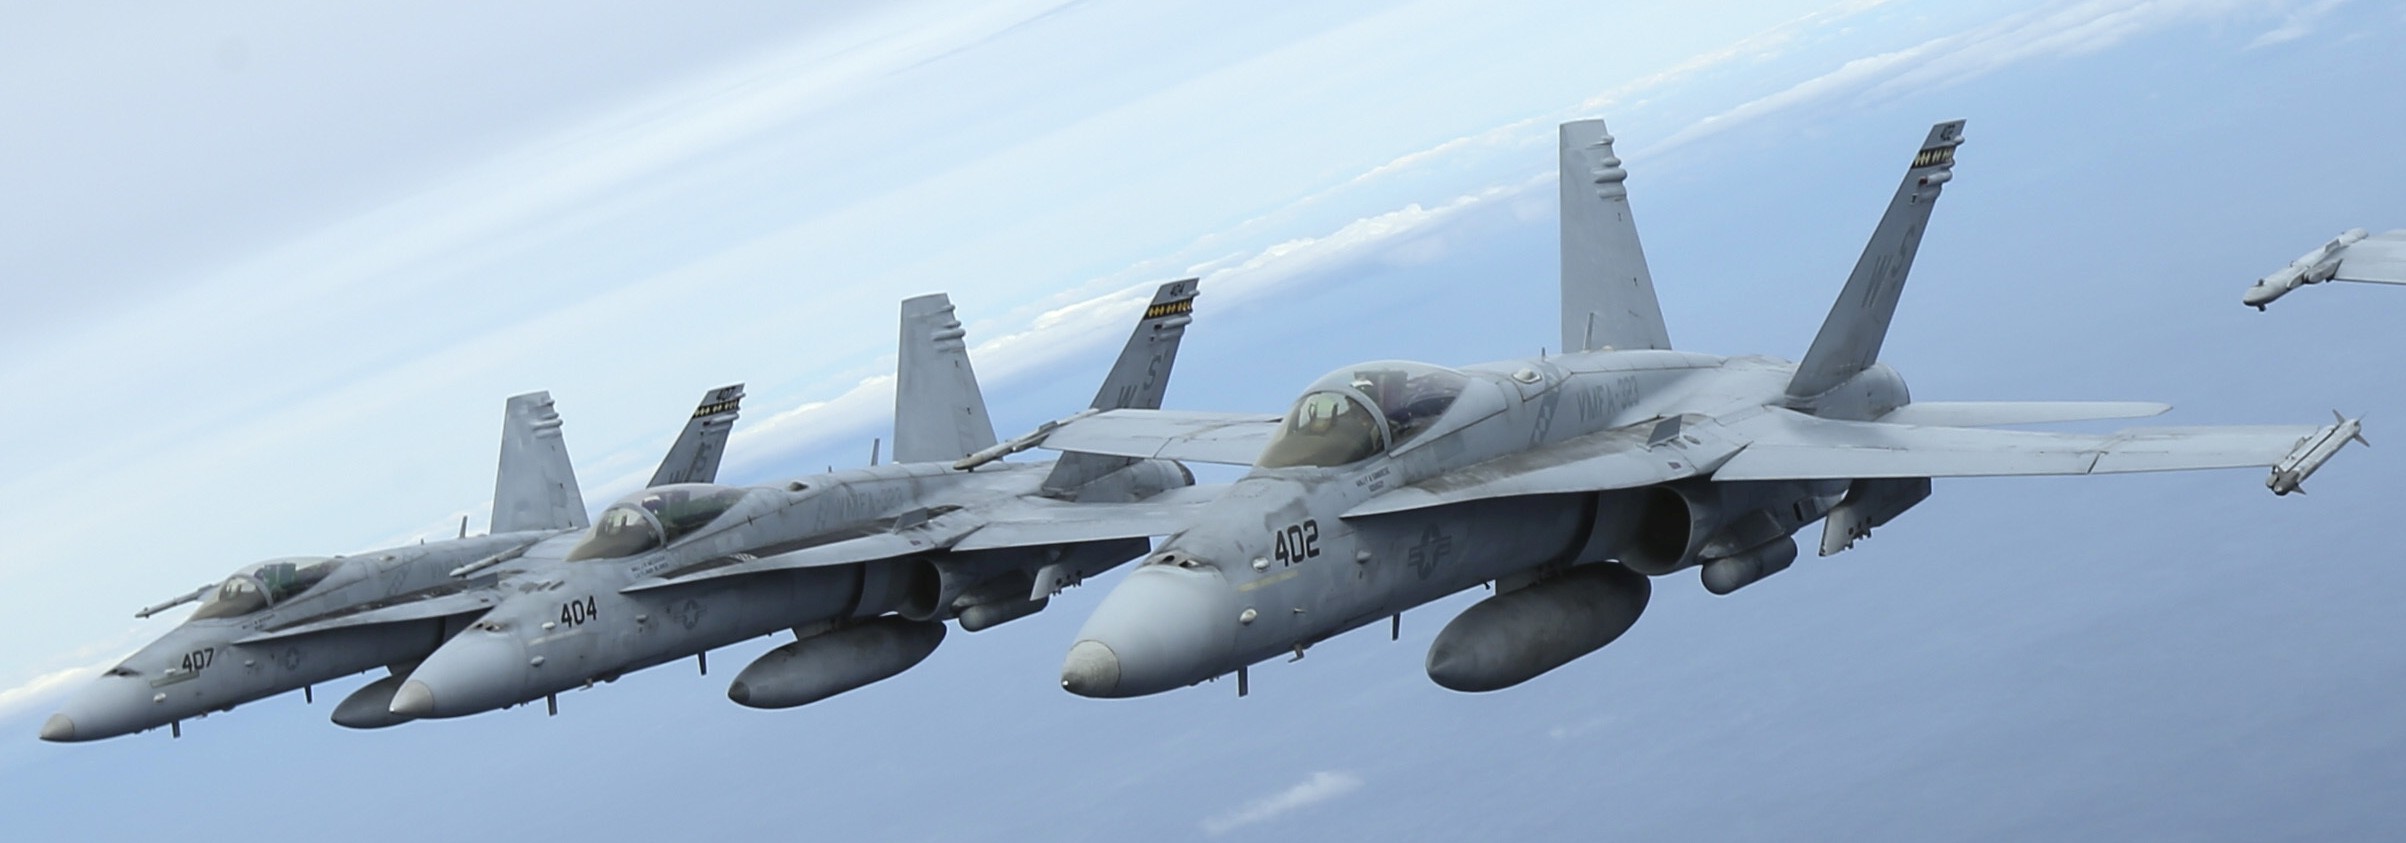 vmfa-323 death rattlers marine fighter attack squadron f/a-18c hornet 167